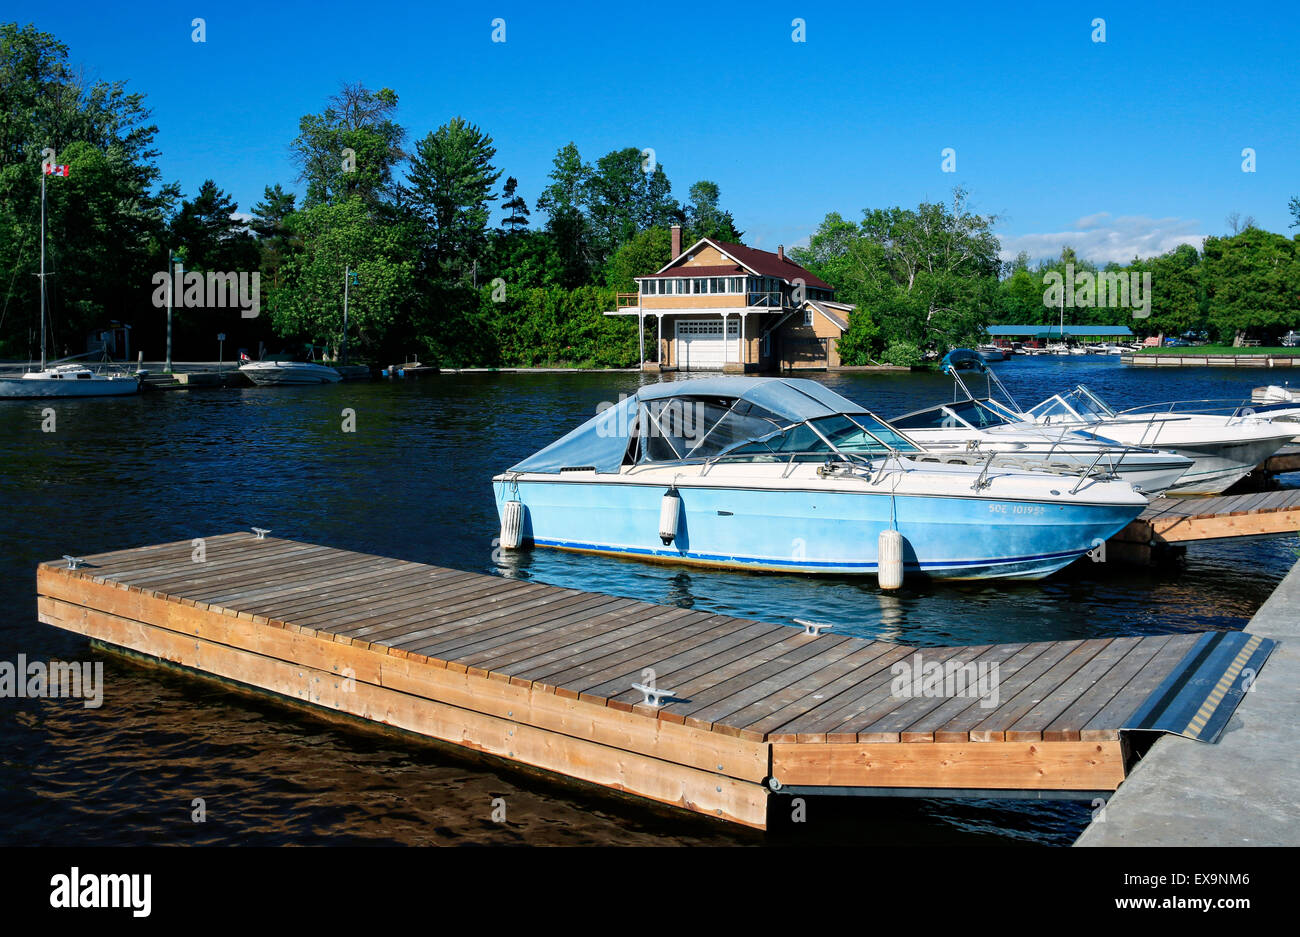 Beaverton Harbour with marina and historic boat house at the mouth of Beaver River and Lake Simcoe, in Brock, Duraham Region, On Stock Photo